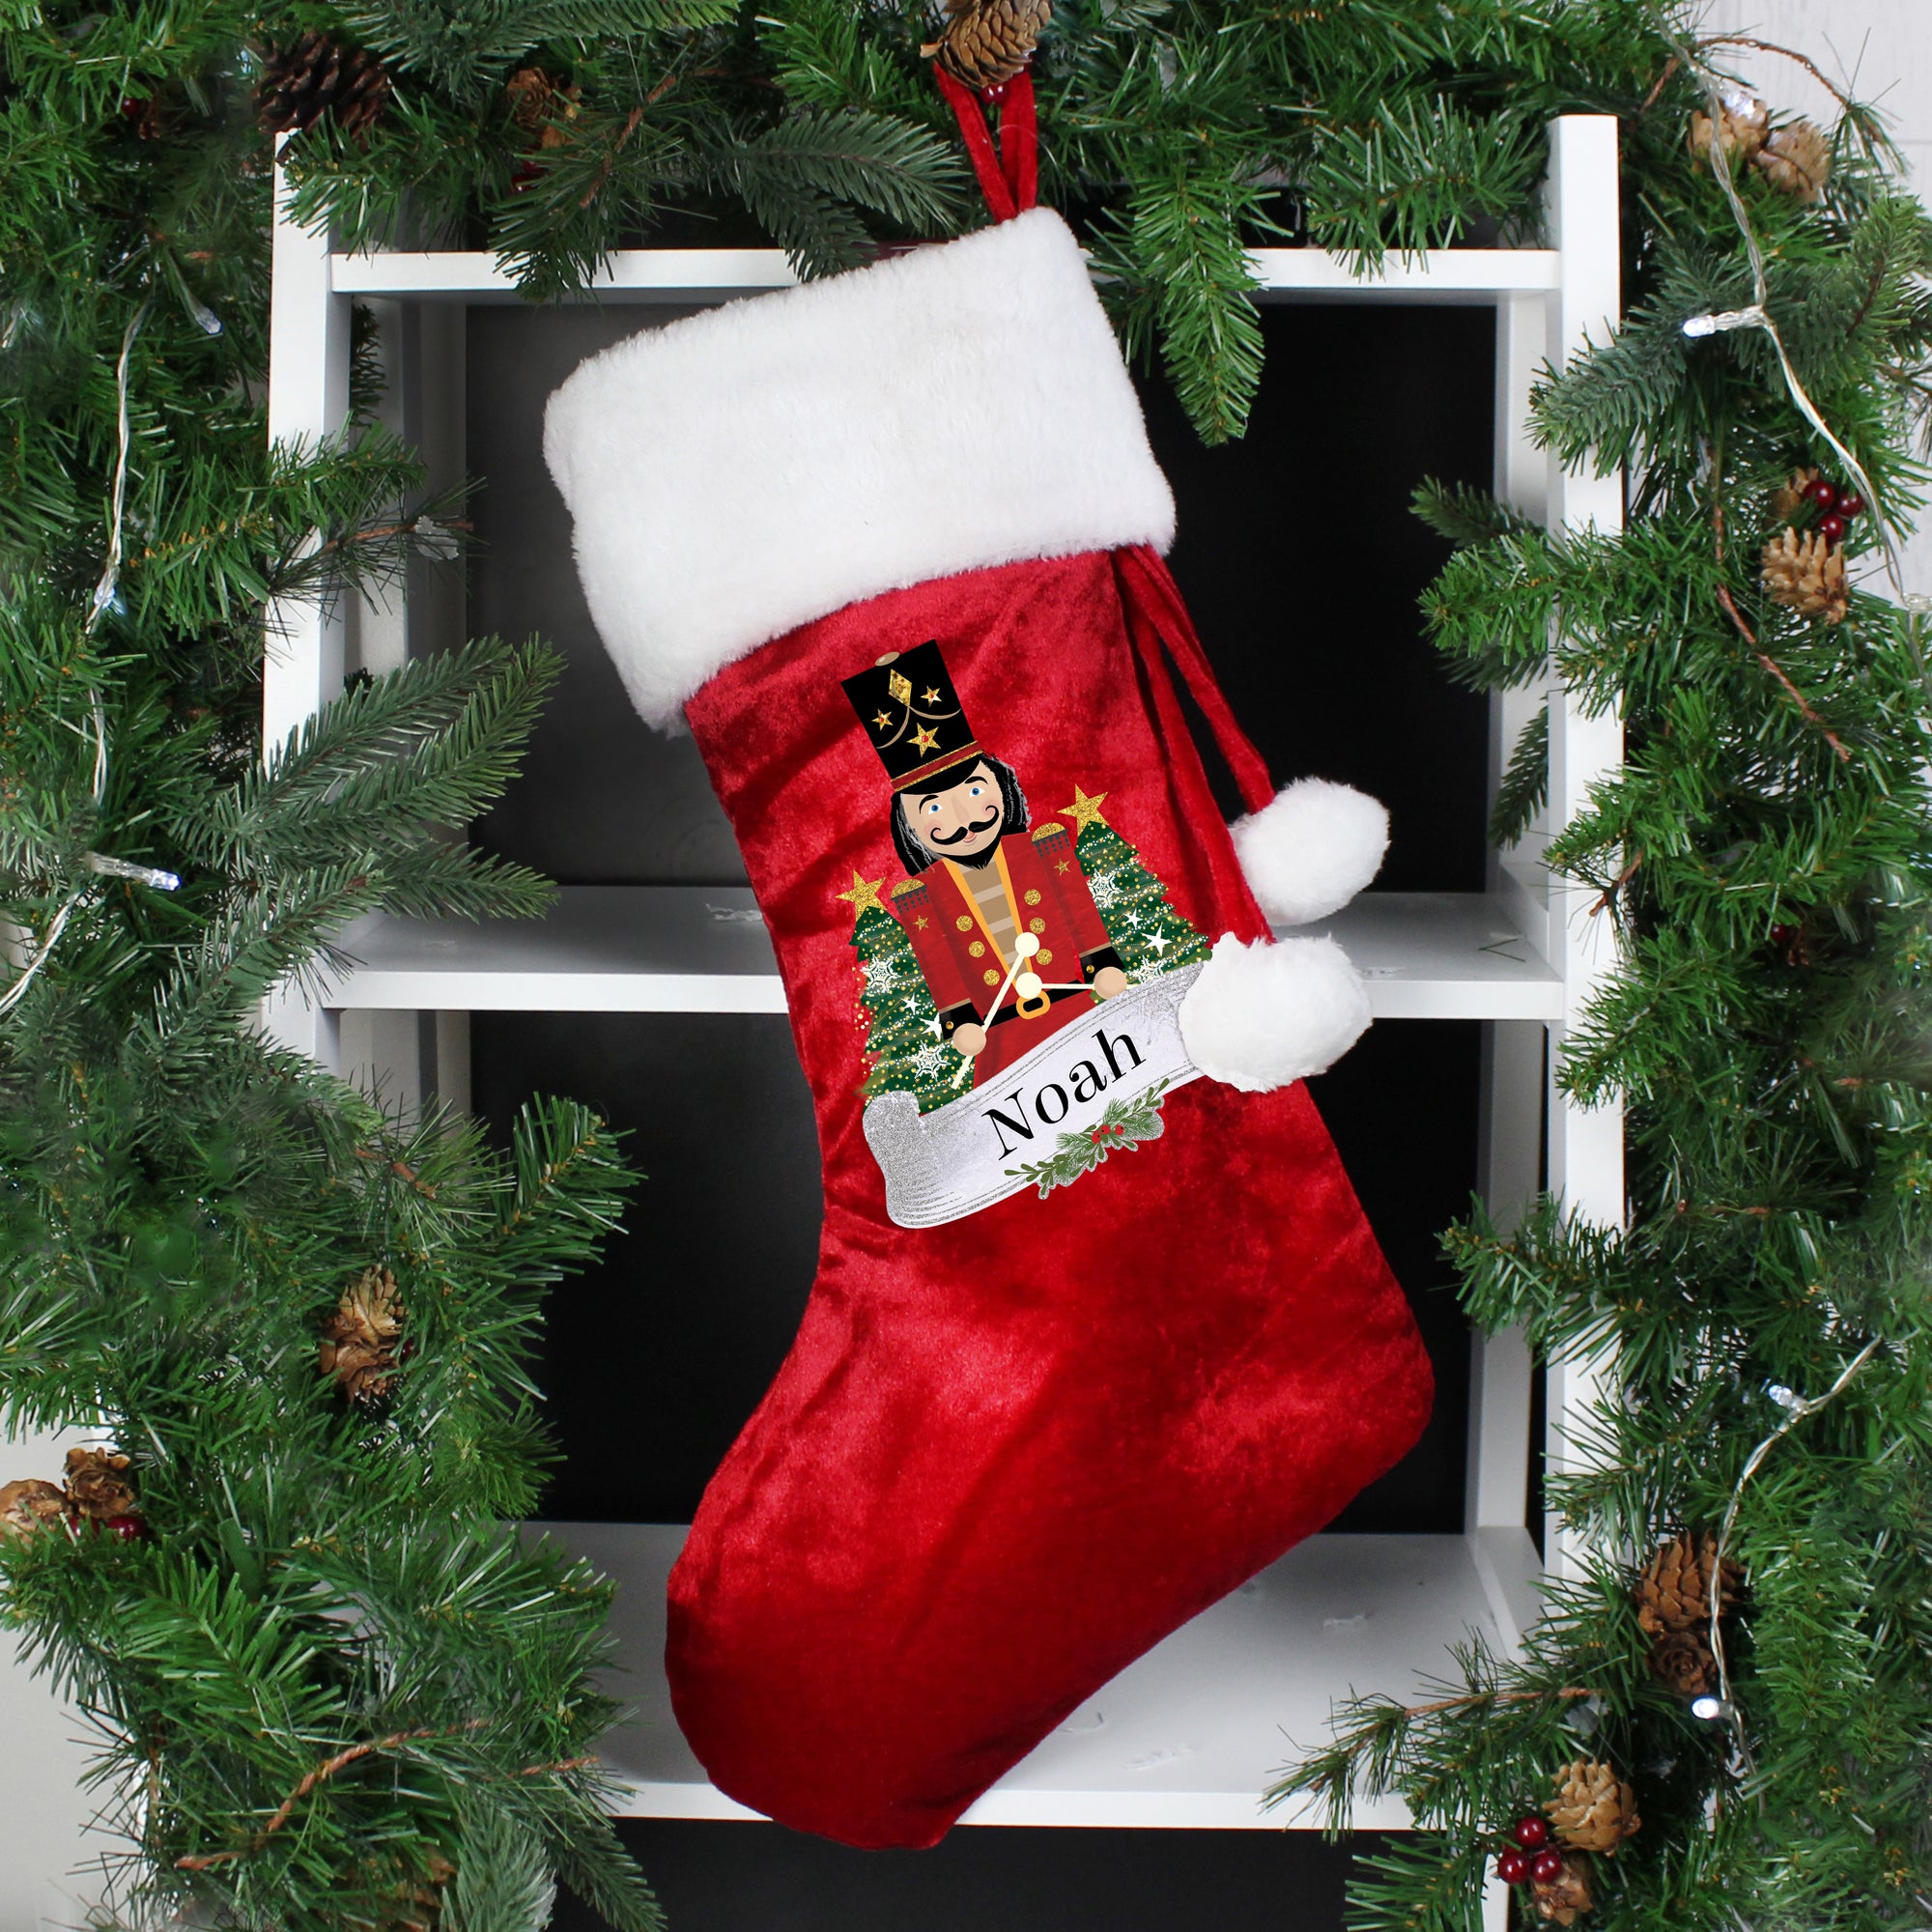 Plush red Christmas stocking with a white fur trim and two white pom poms hanging from the side. The stocking has an illustration of a wooden nutcracker toy on the front and it can be personalised with a name of your choice of up to 12 characters.